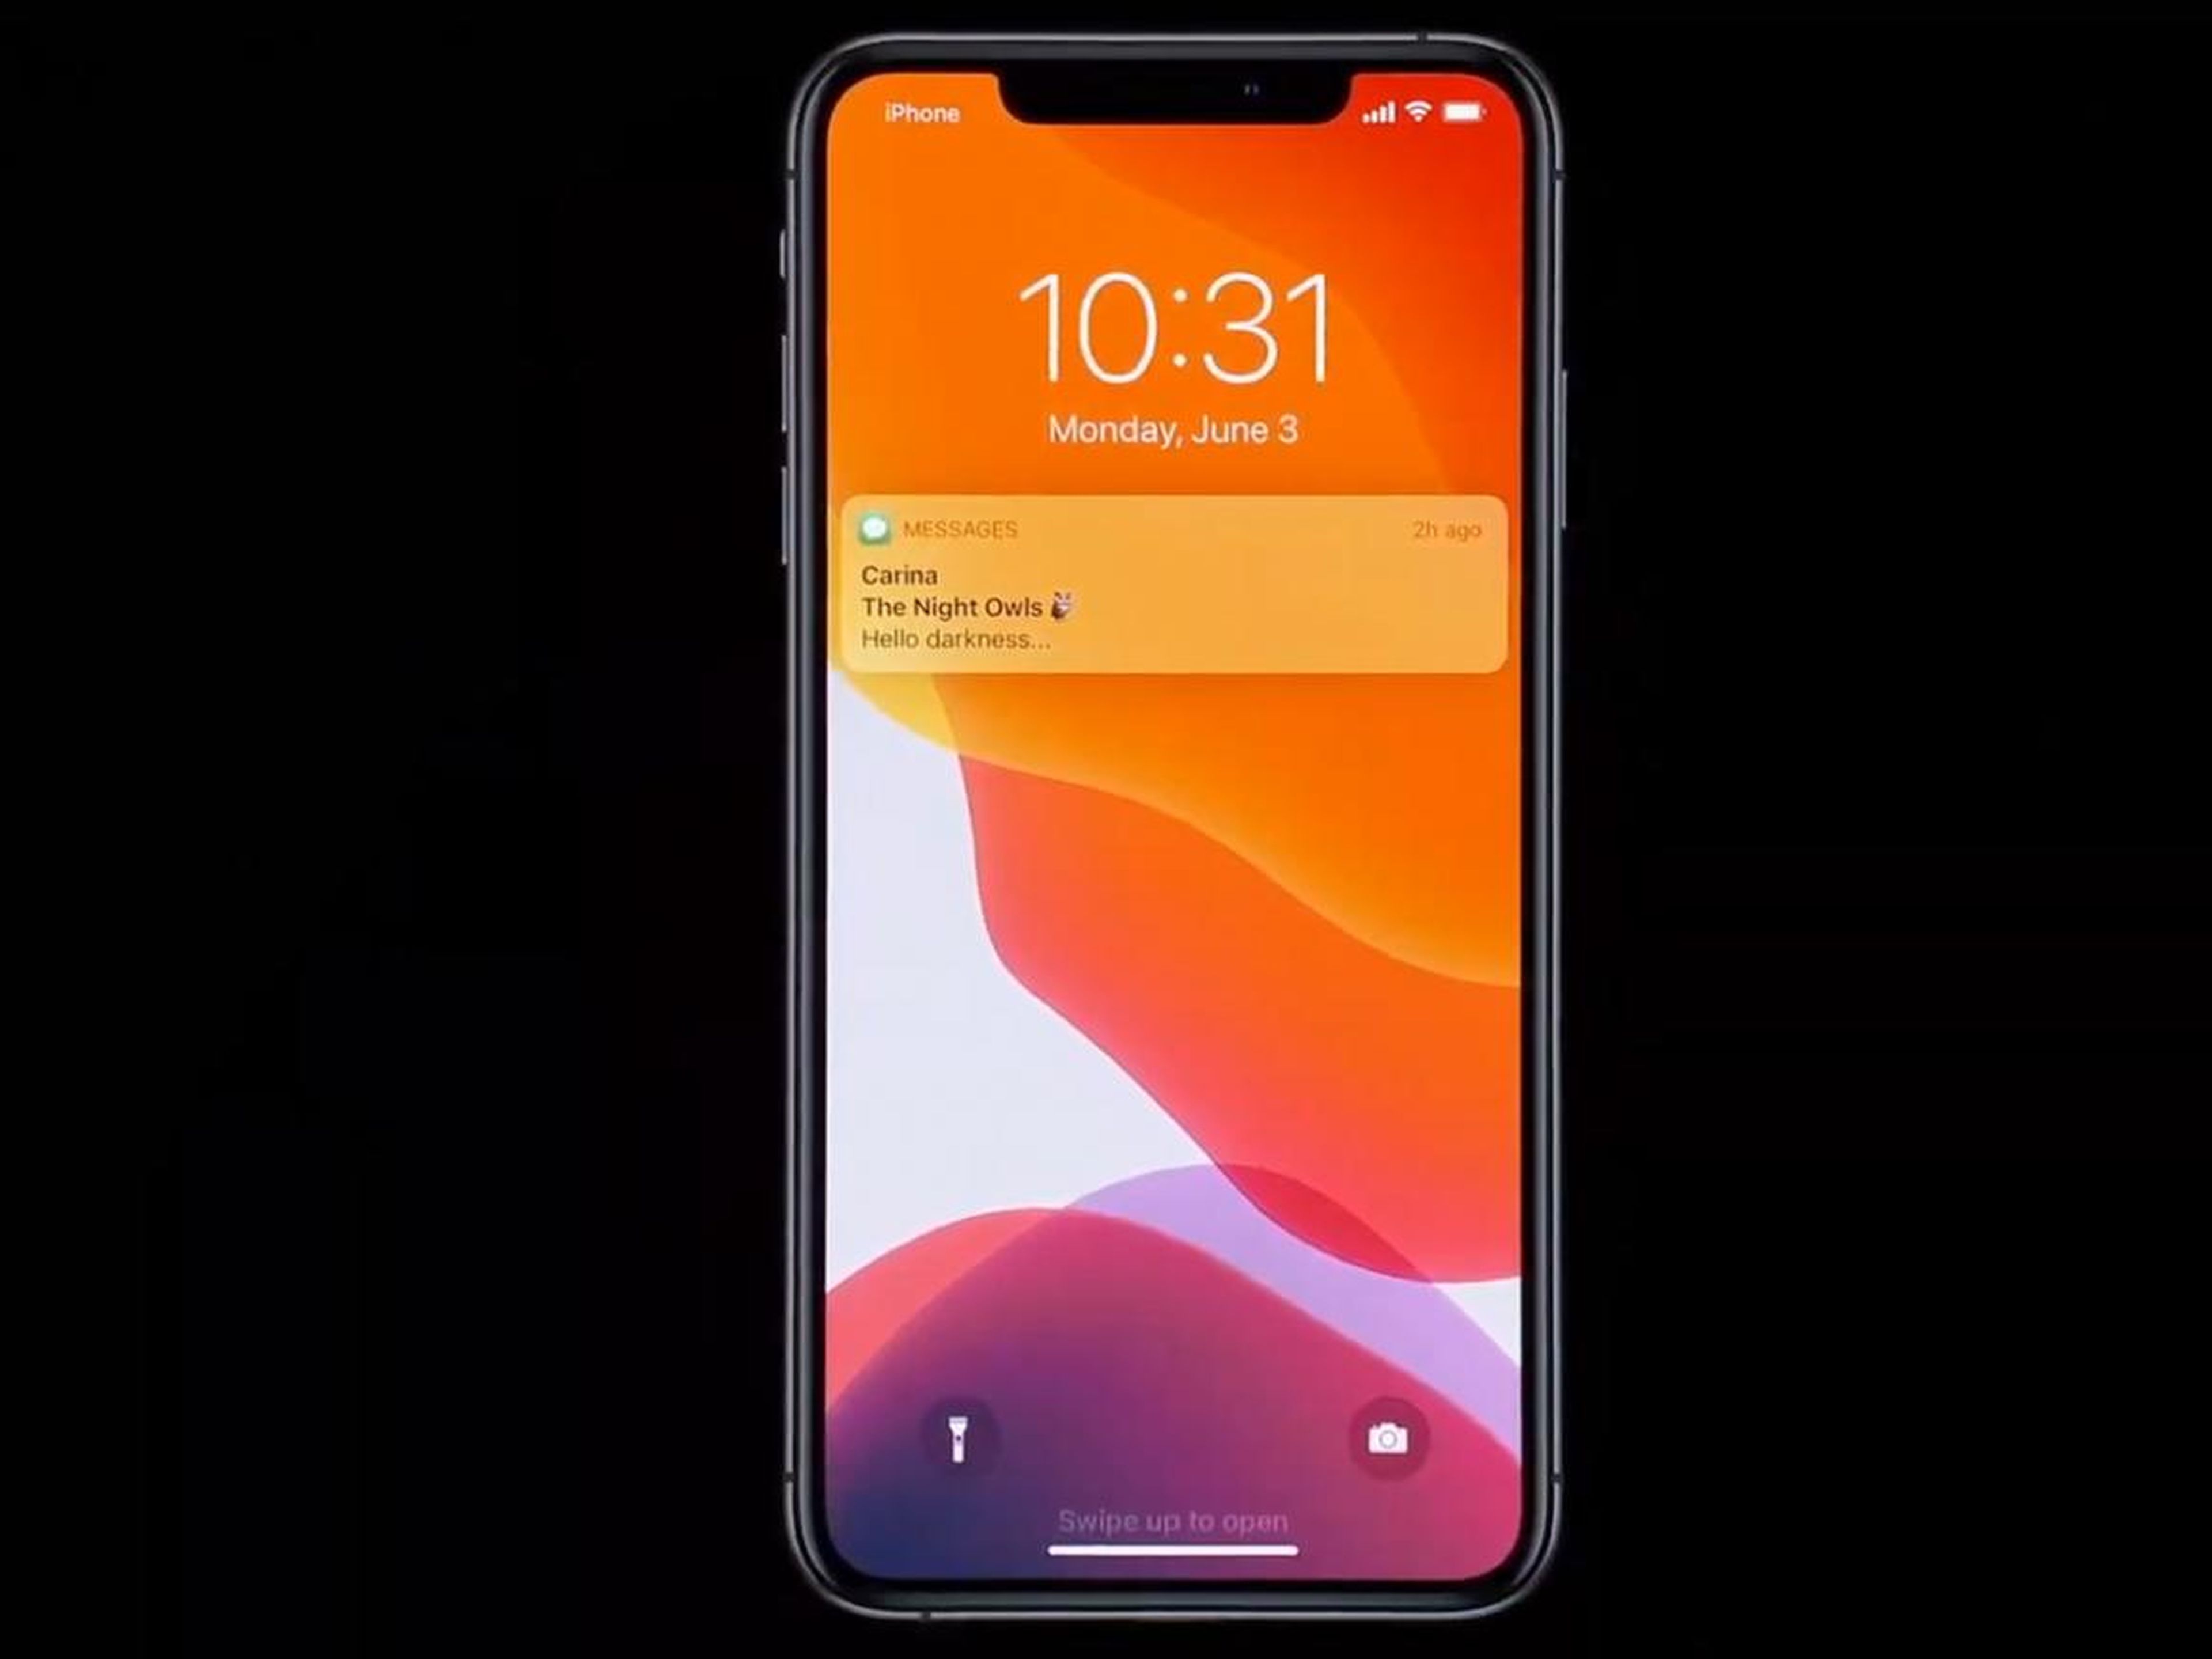 Here's what the iOS 13 lock screen looks like without dark mode.